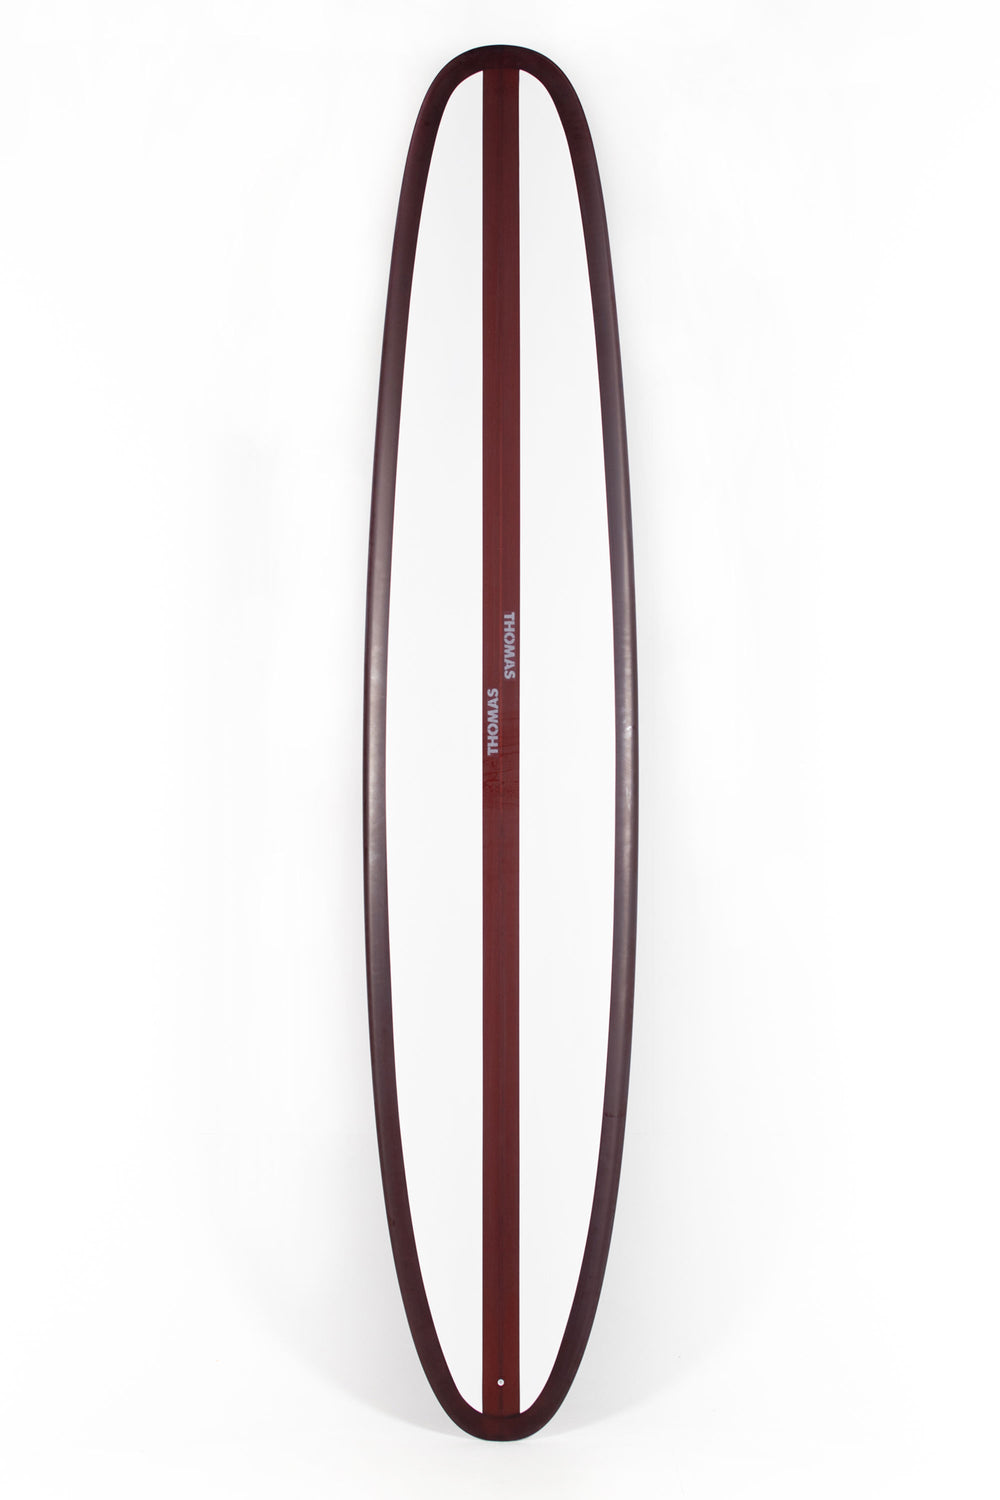 Pukas Surf Shop - Thomas Surfboards - THE HARIOT - 9'8